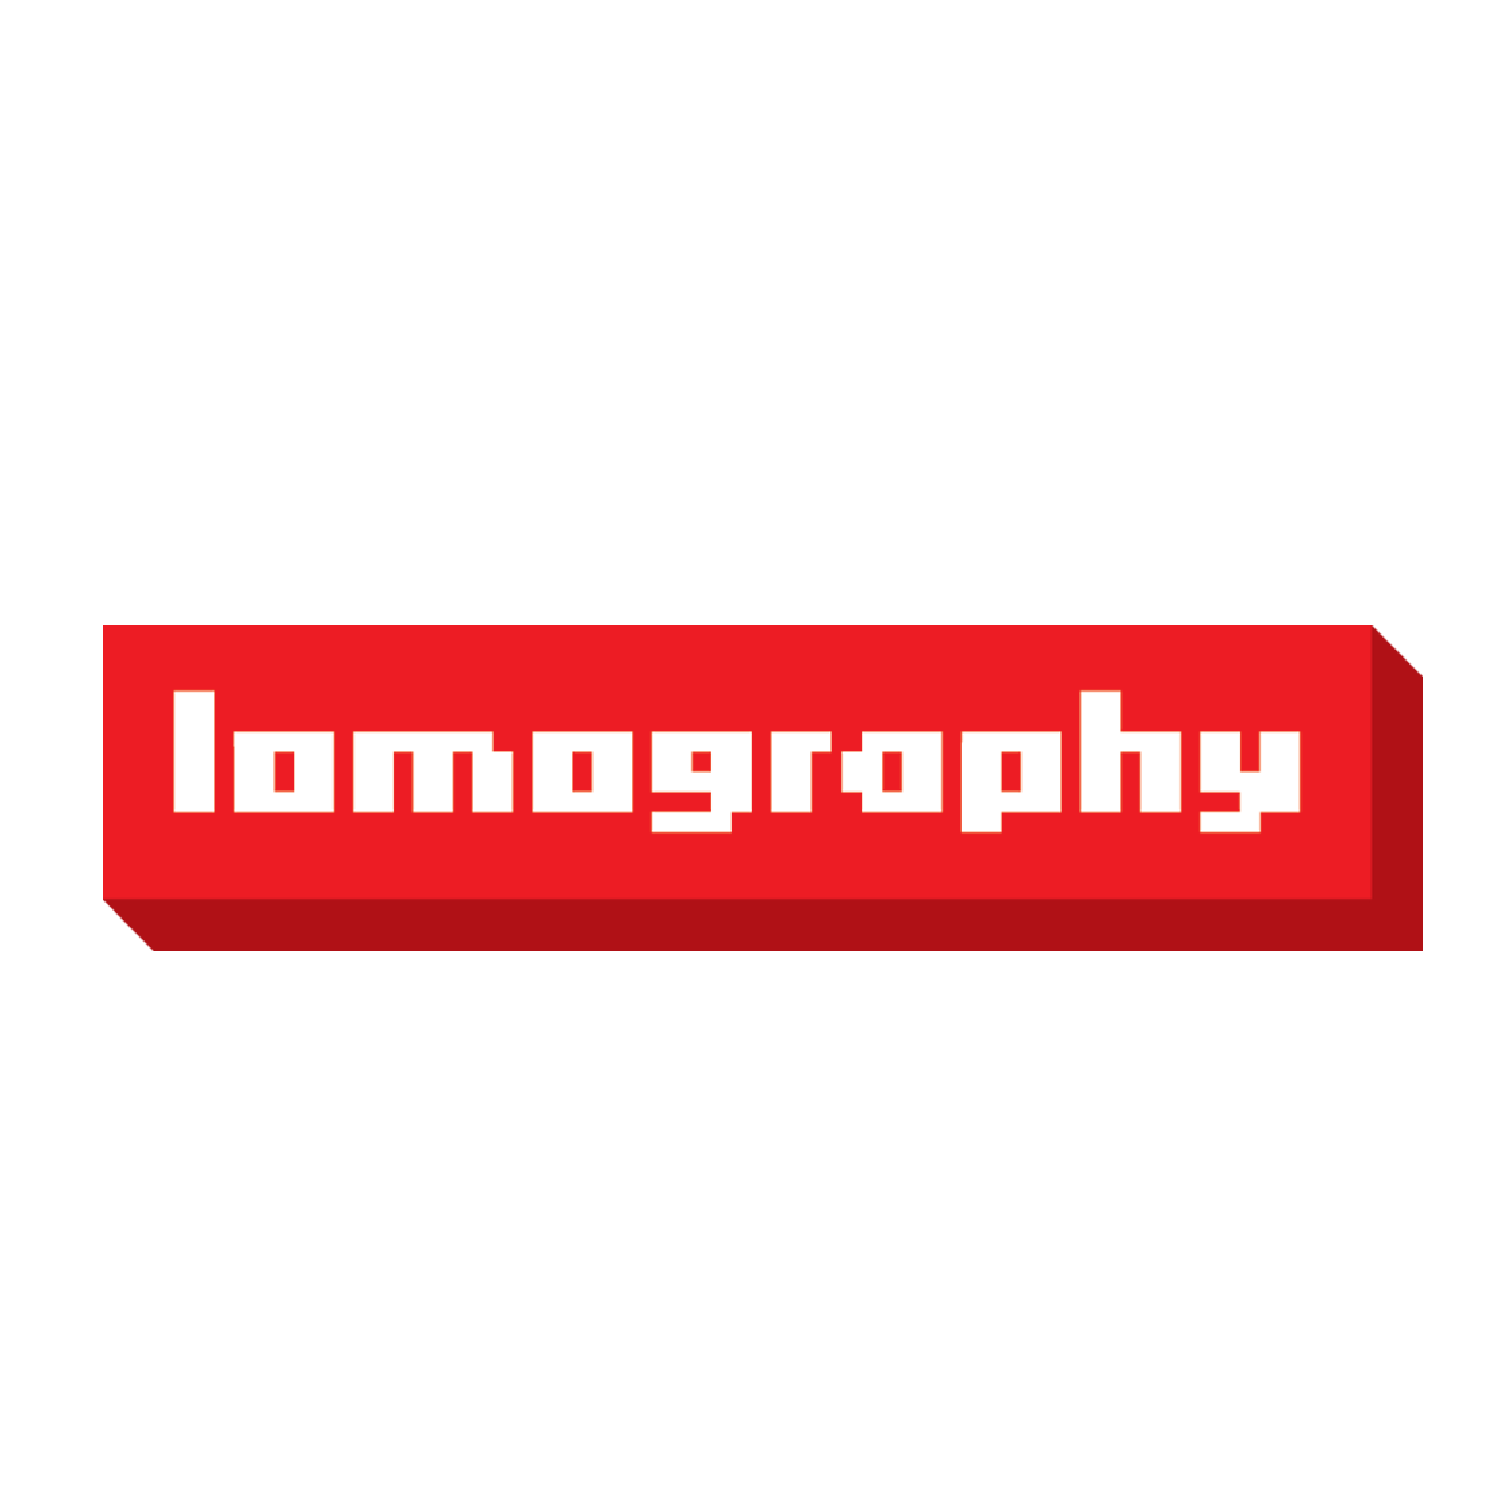 Lomography red and white logo